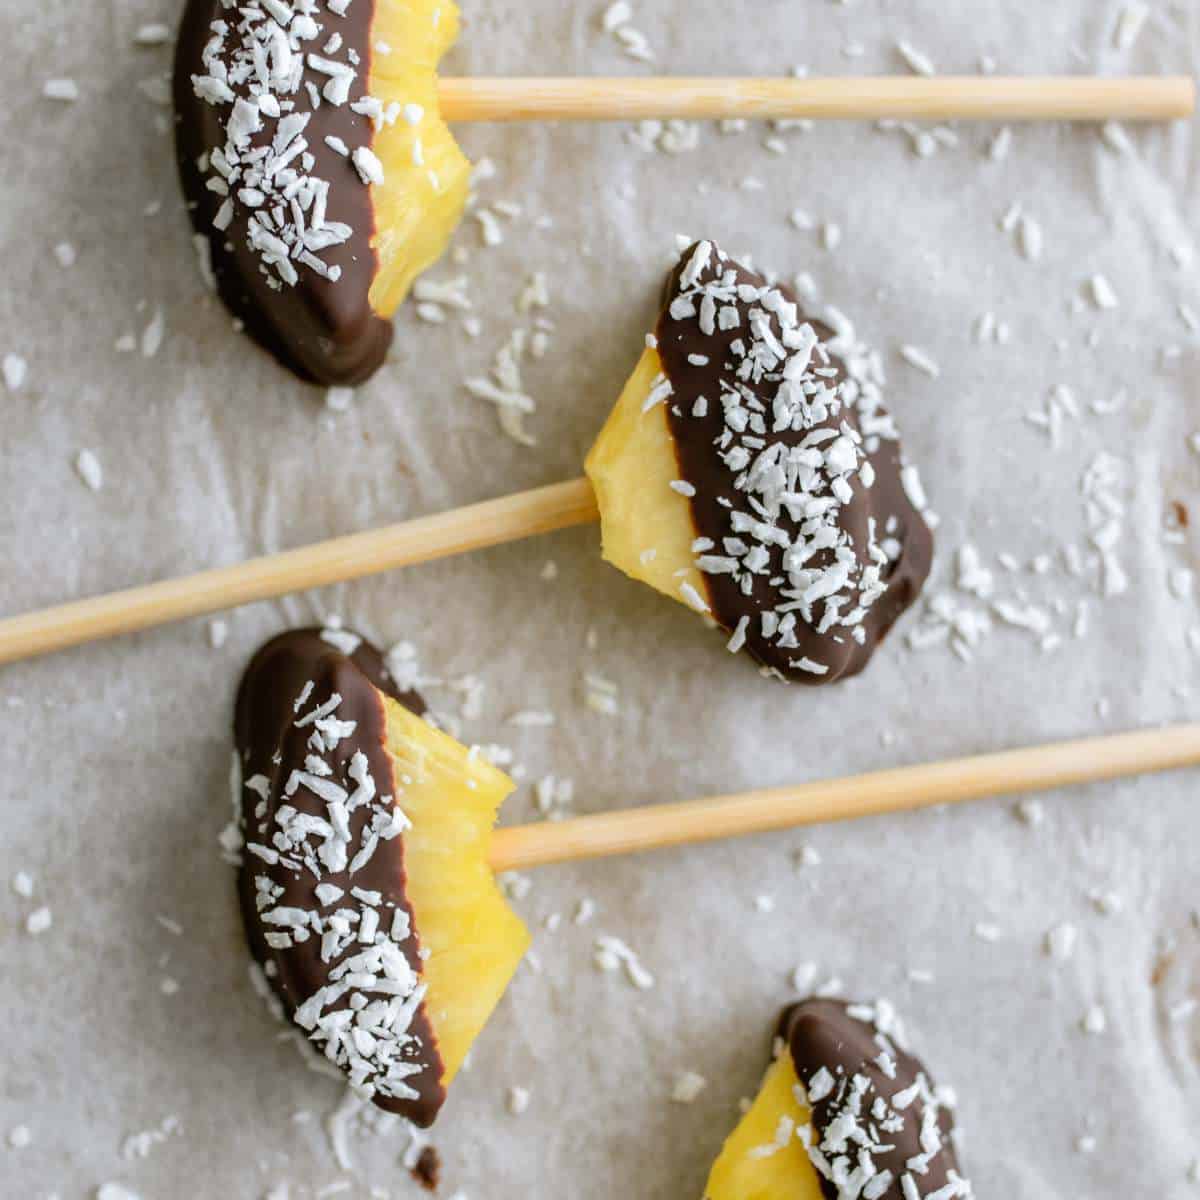 Chocolate-covered pineapples on a baking sheet.